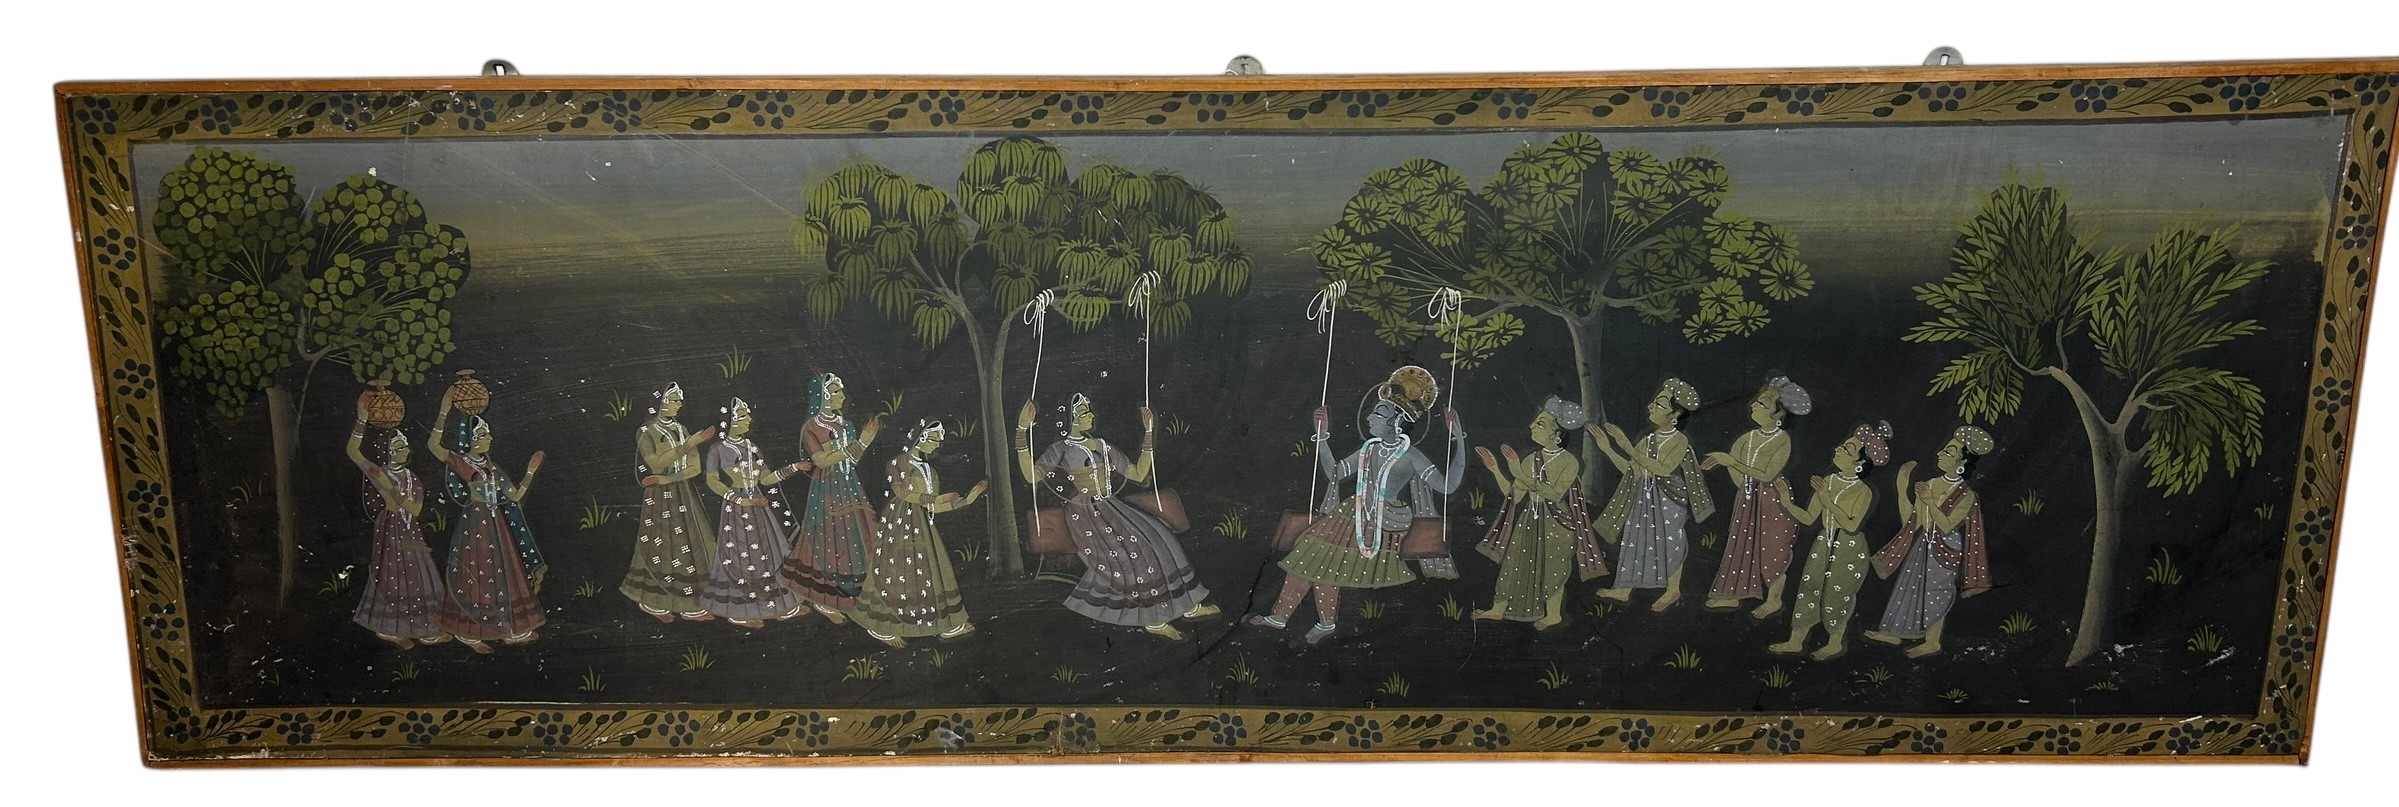 A LARGE INDIAN PAINTING ON LINEN 182cm x 59cm